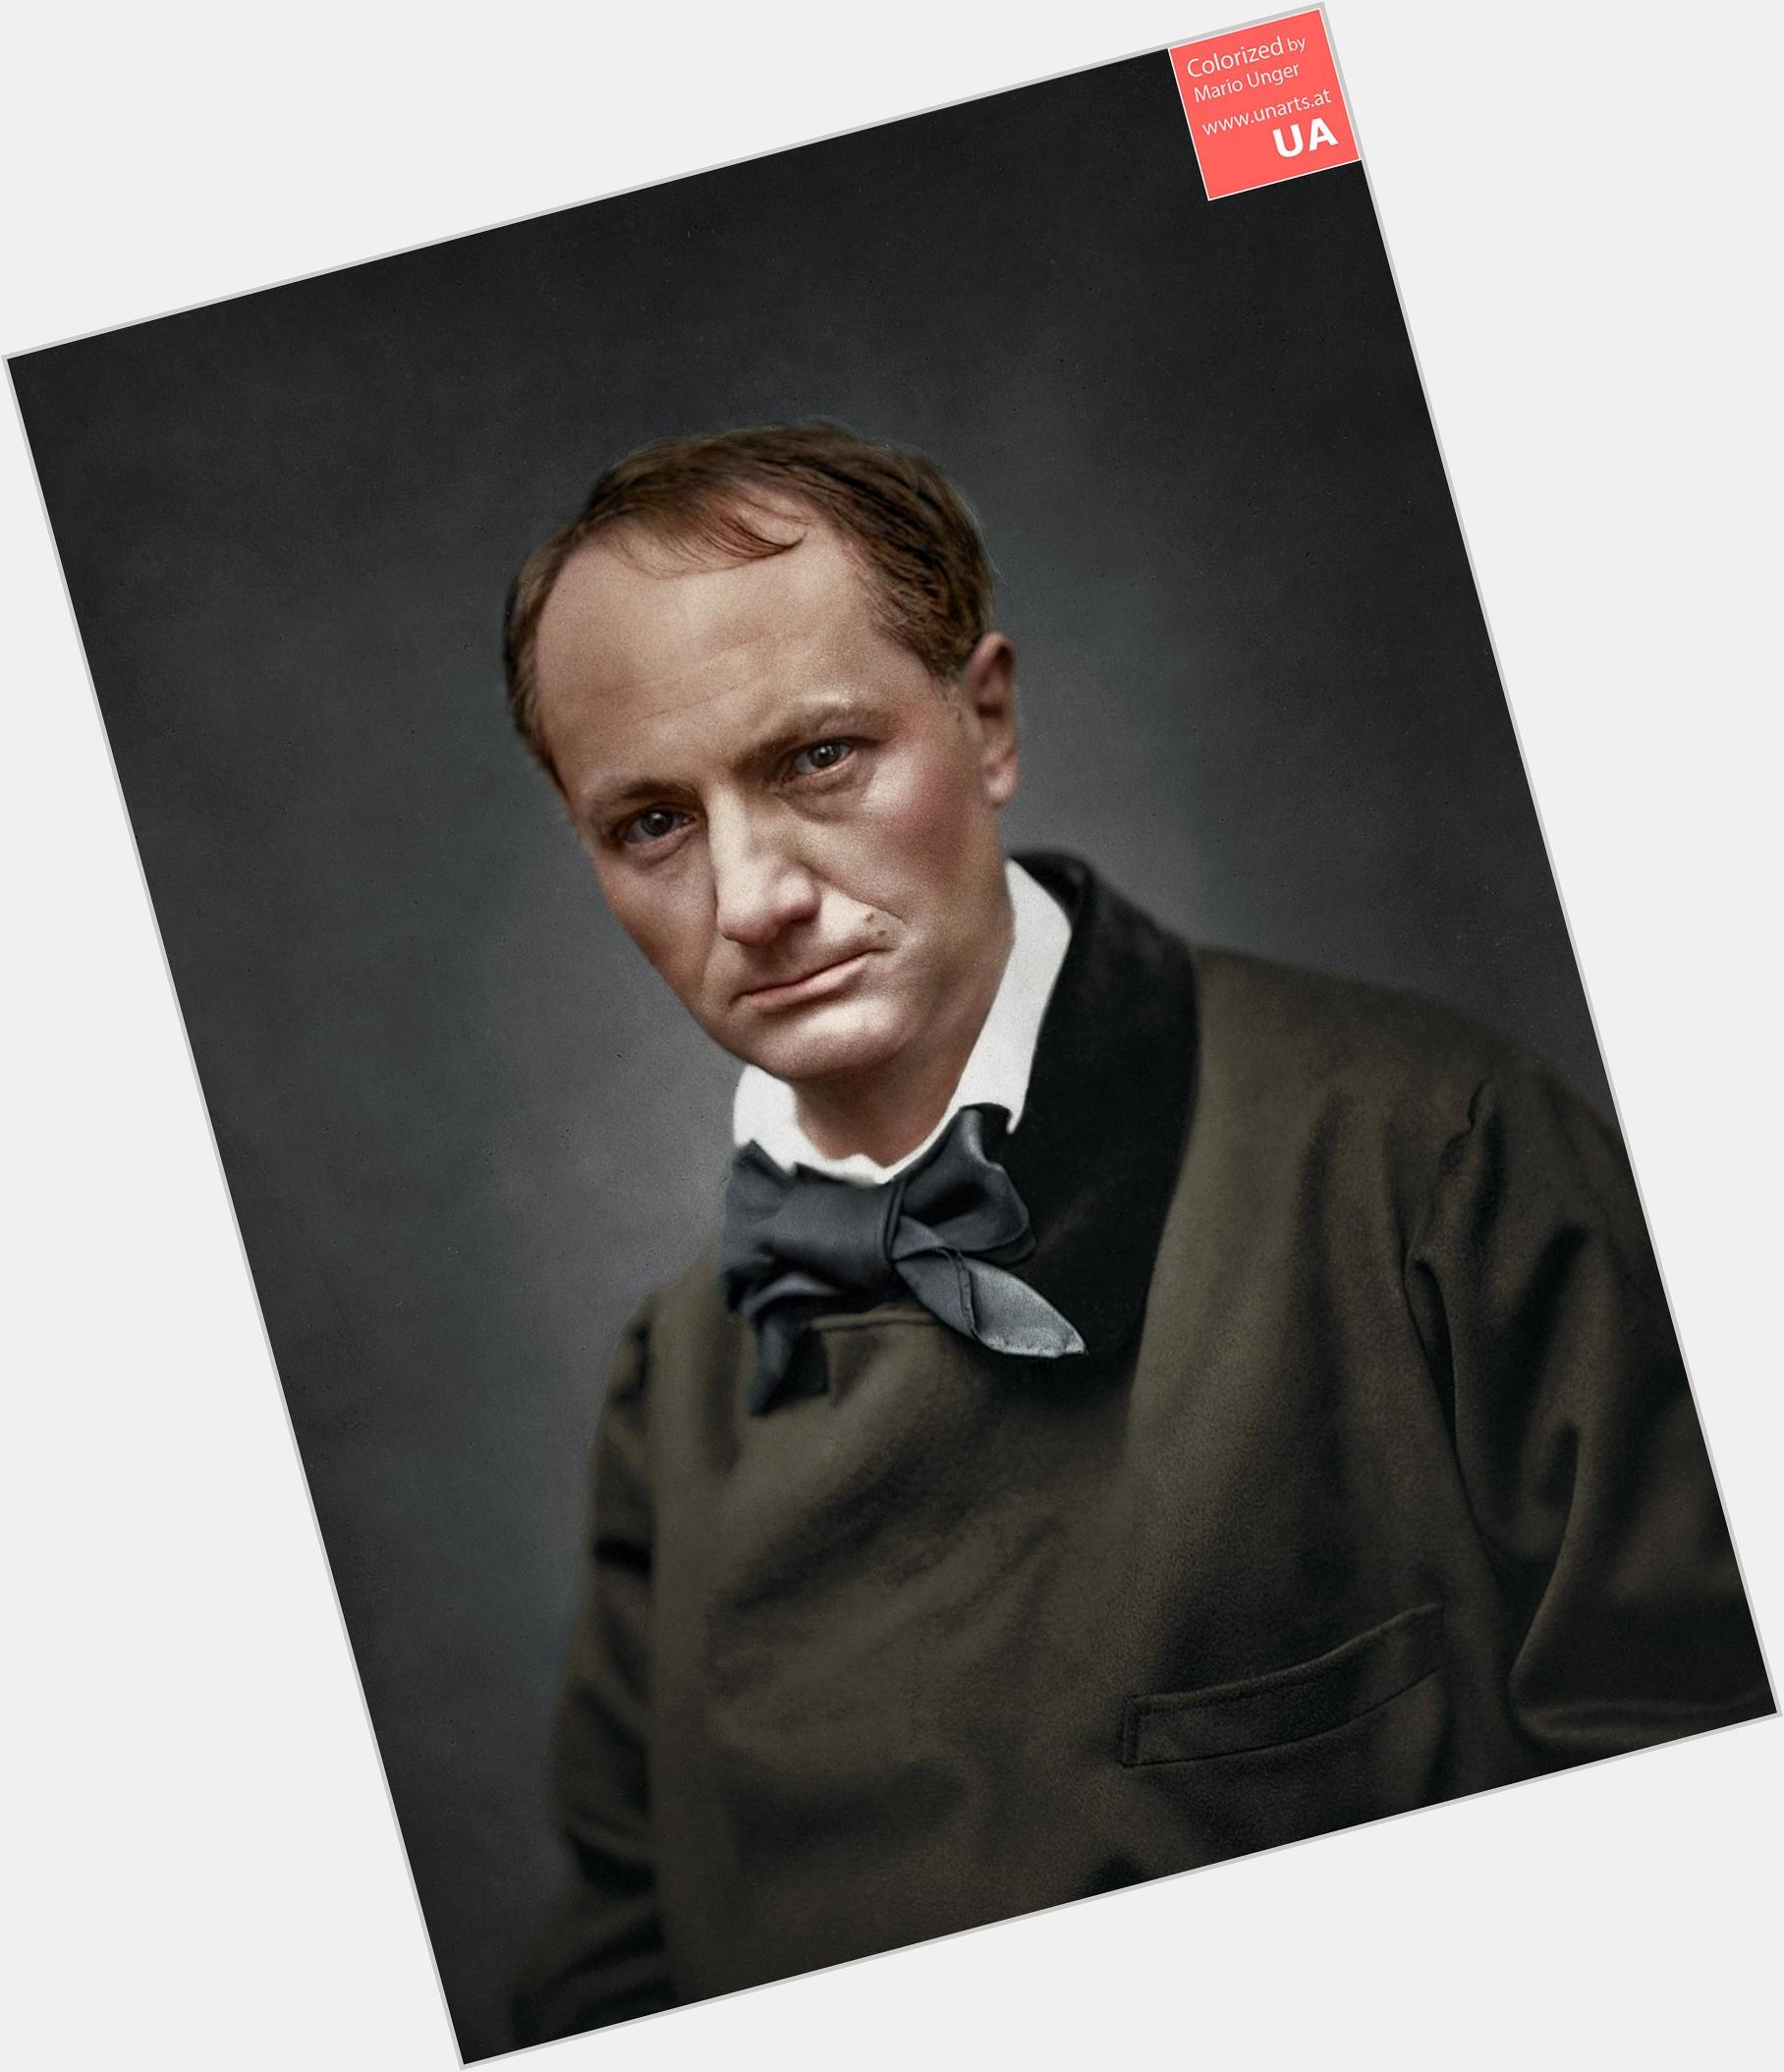 <a href="/hot-men/charles-baudelaire/where-dating-news-photos">Charles Baudelaire</a>  